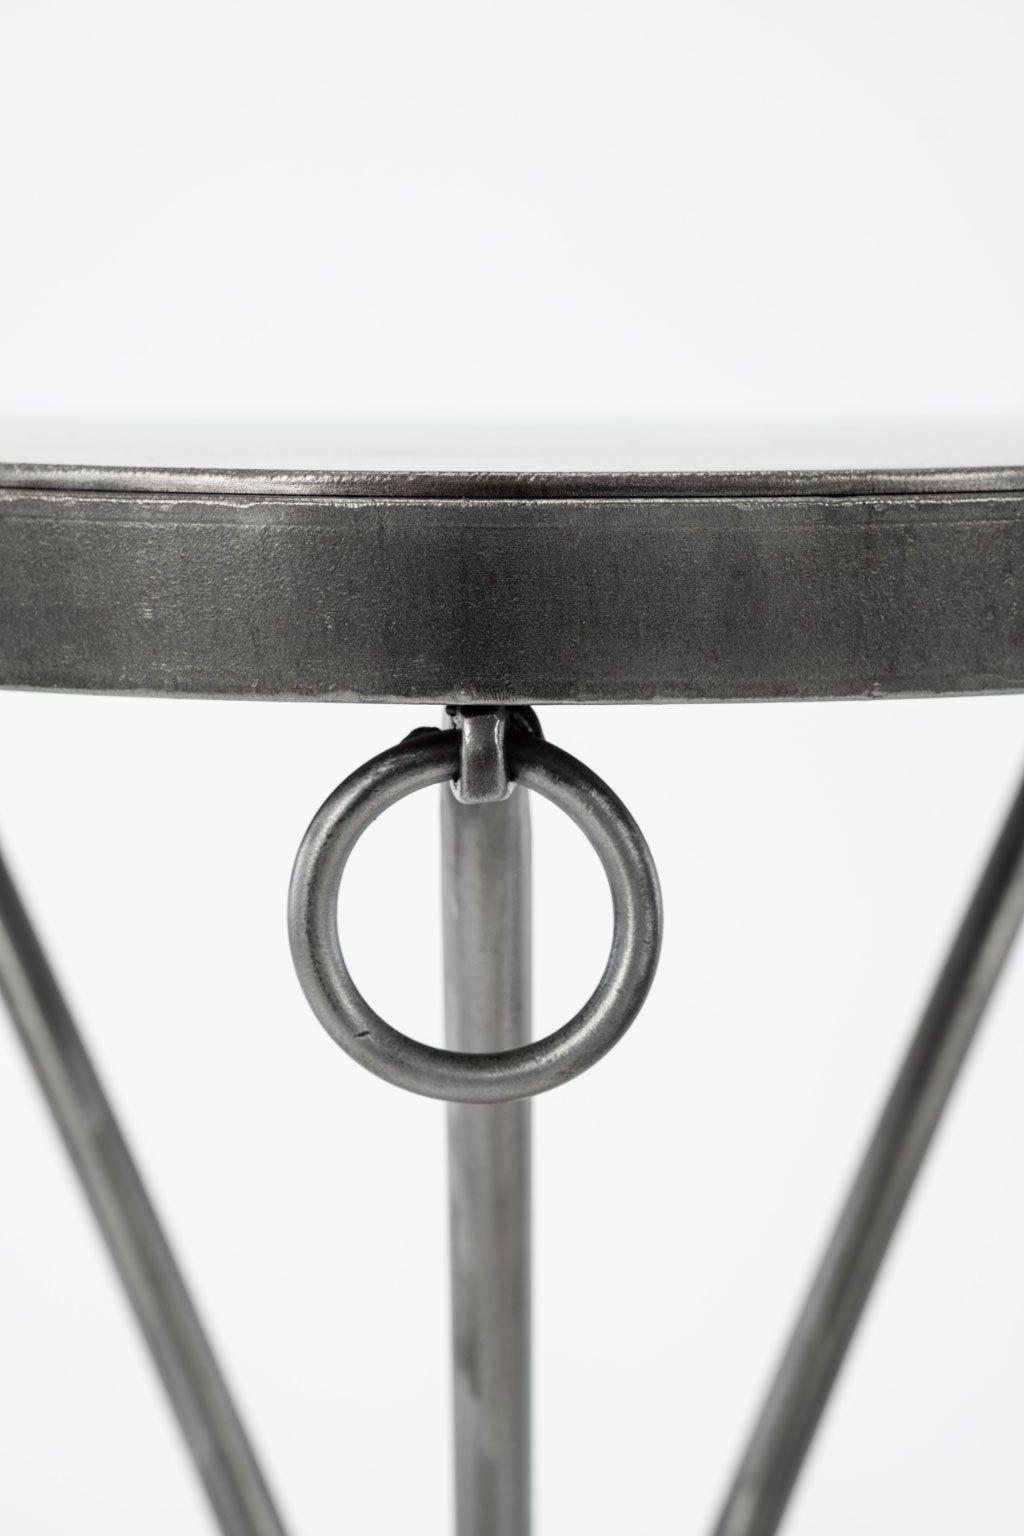 Custom steel drinks table on tripod base. Hand-forged locally with raw steel finish. Larger diameter also available (see items ref 944A & 944B).